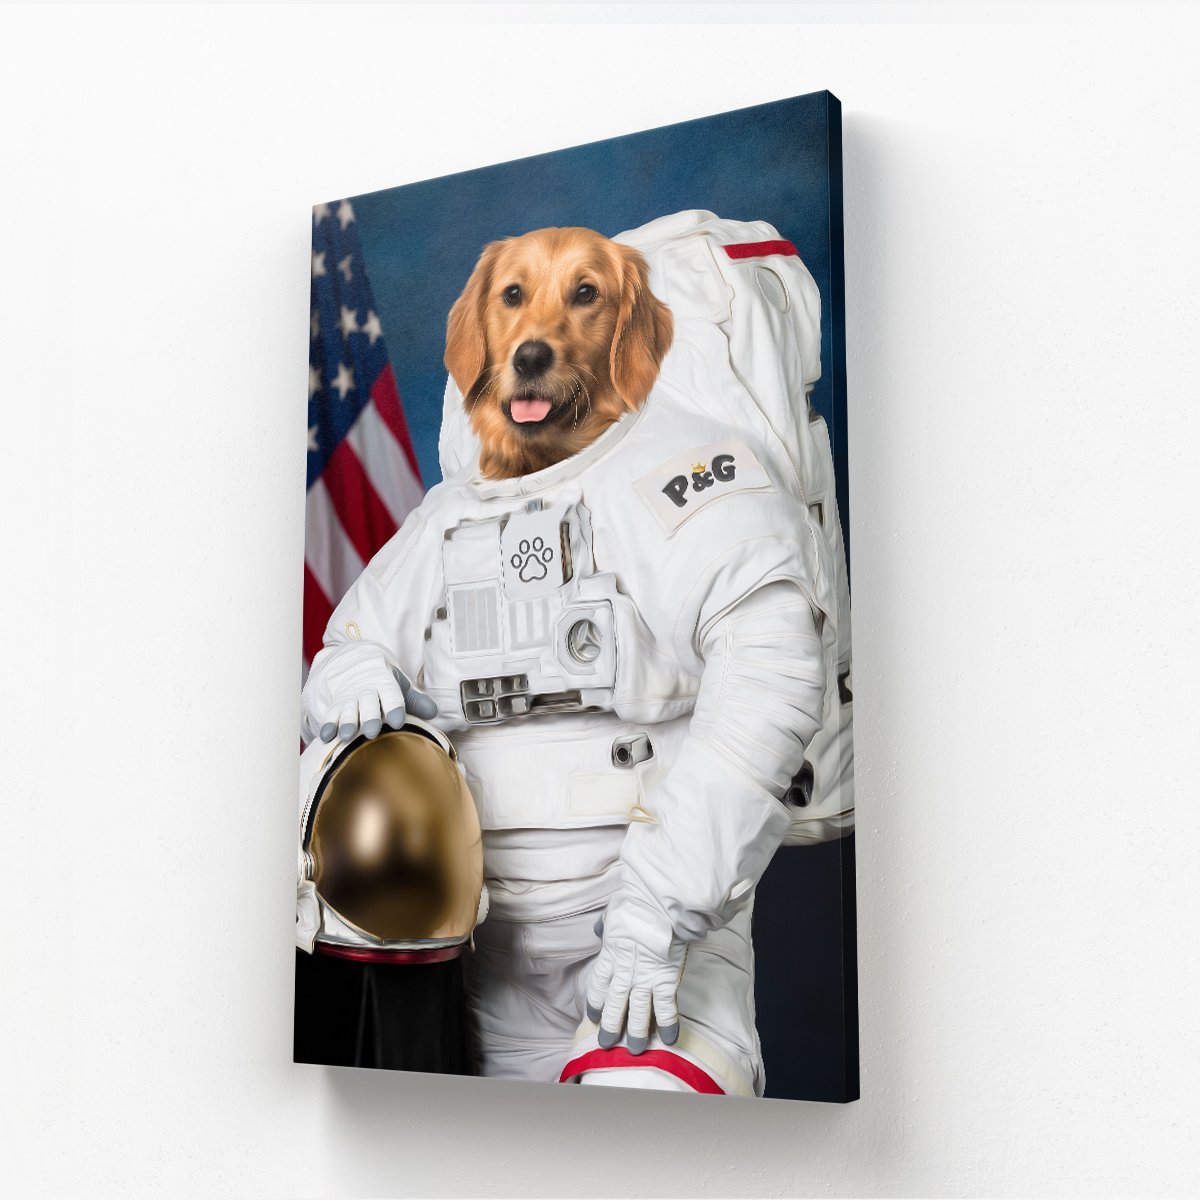 The Astronaut: Custom Pet Canvas - Paw & Glory - #pet portraits# - #dog portraits# - #pet portraits uk#paw & glory, custom pet portrait canvas,dog canvas, personalized dog and owner canvas uk, dog canvas print, personalised dog canvas uk, best pet canvas art